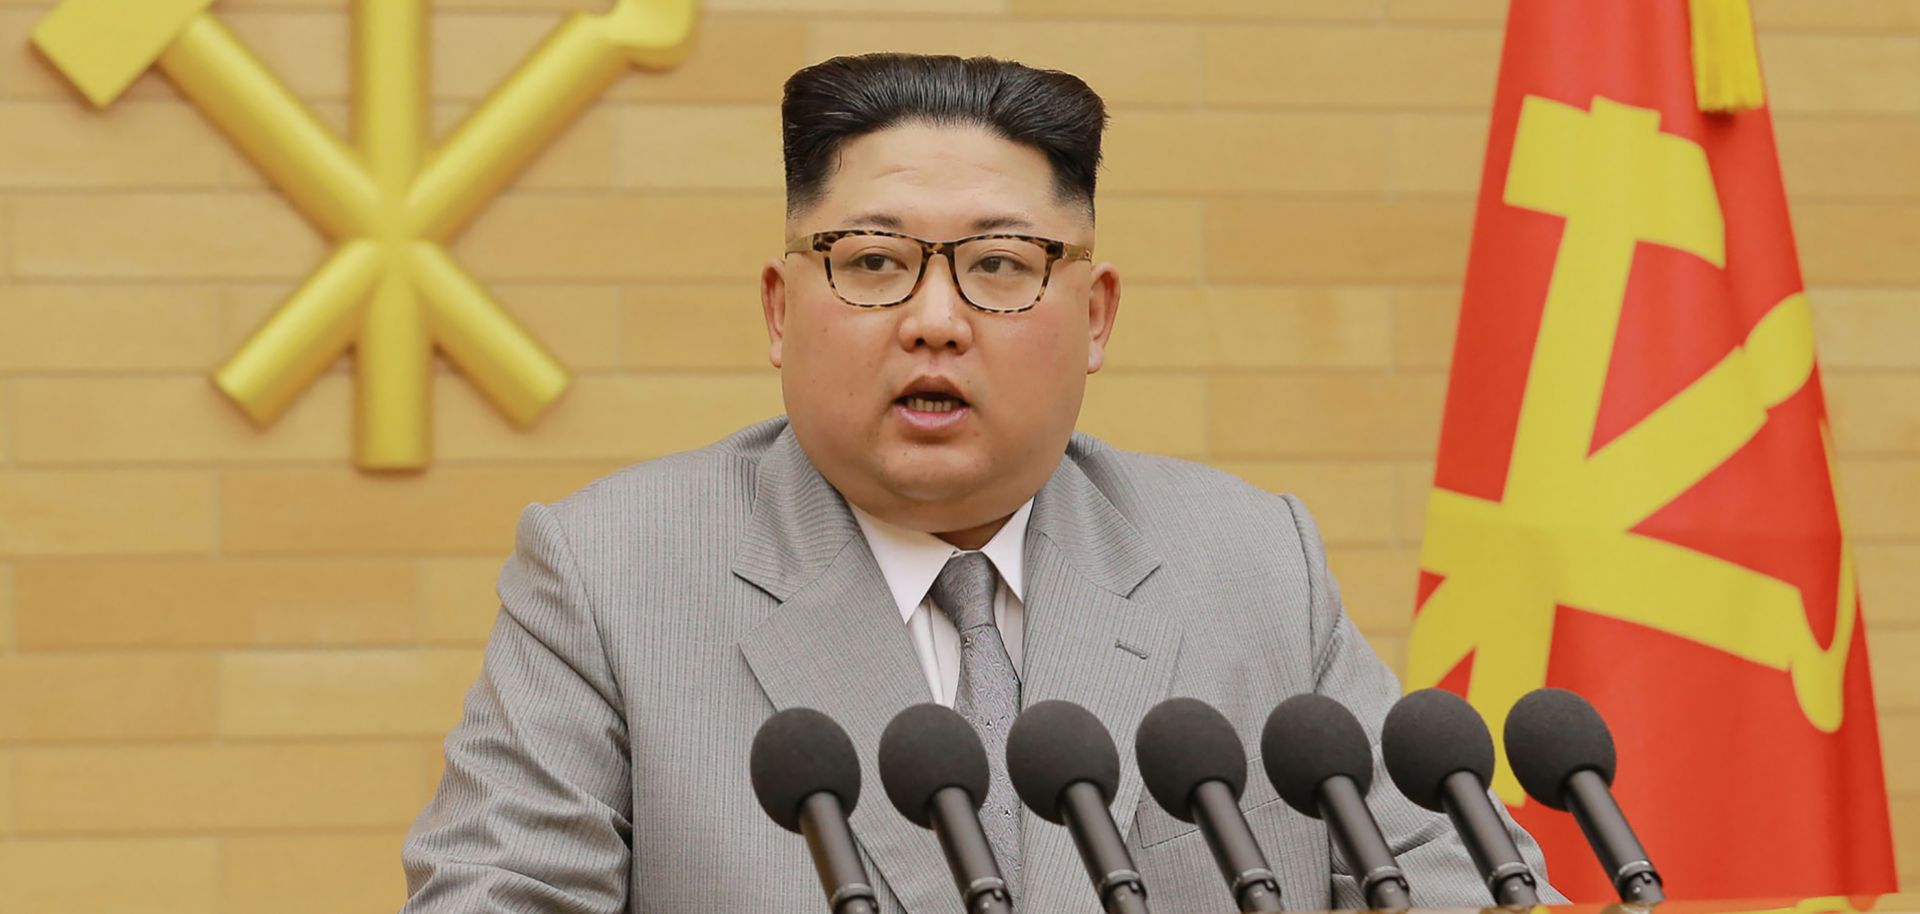 North Korean leader Kim Jong Un delivers a New Year's speech on Jan. 1, 2018.